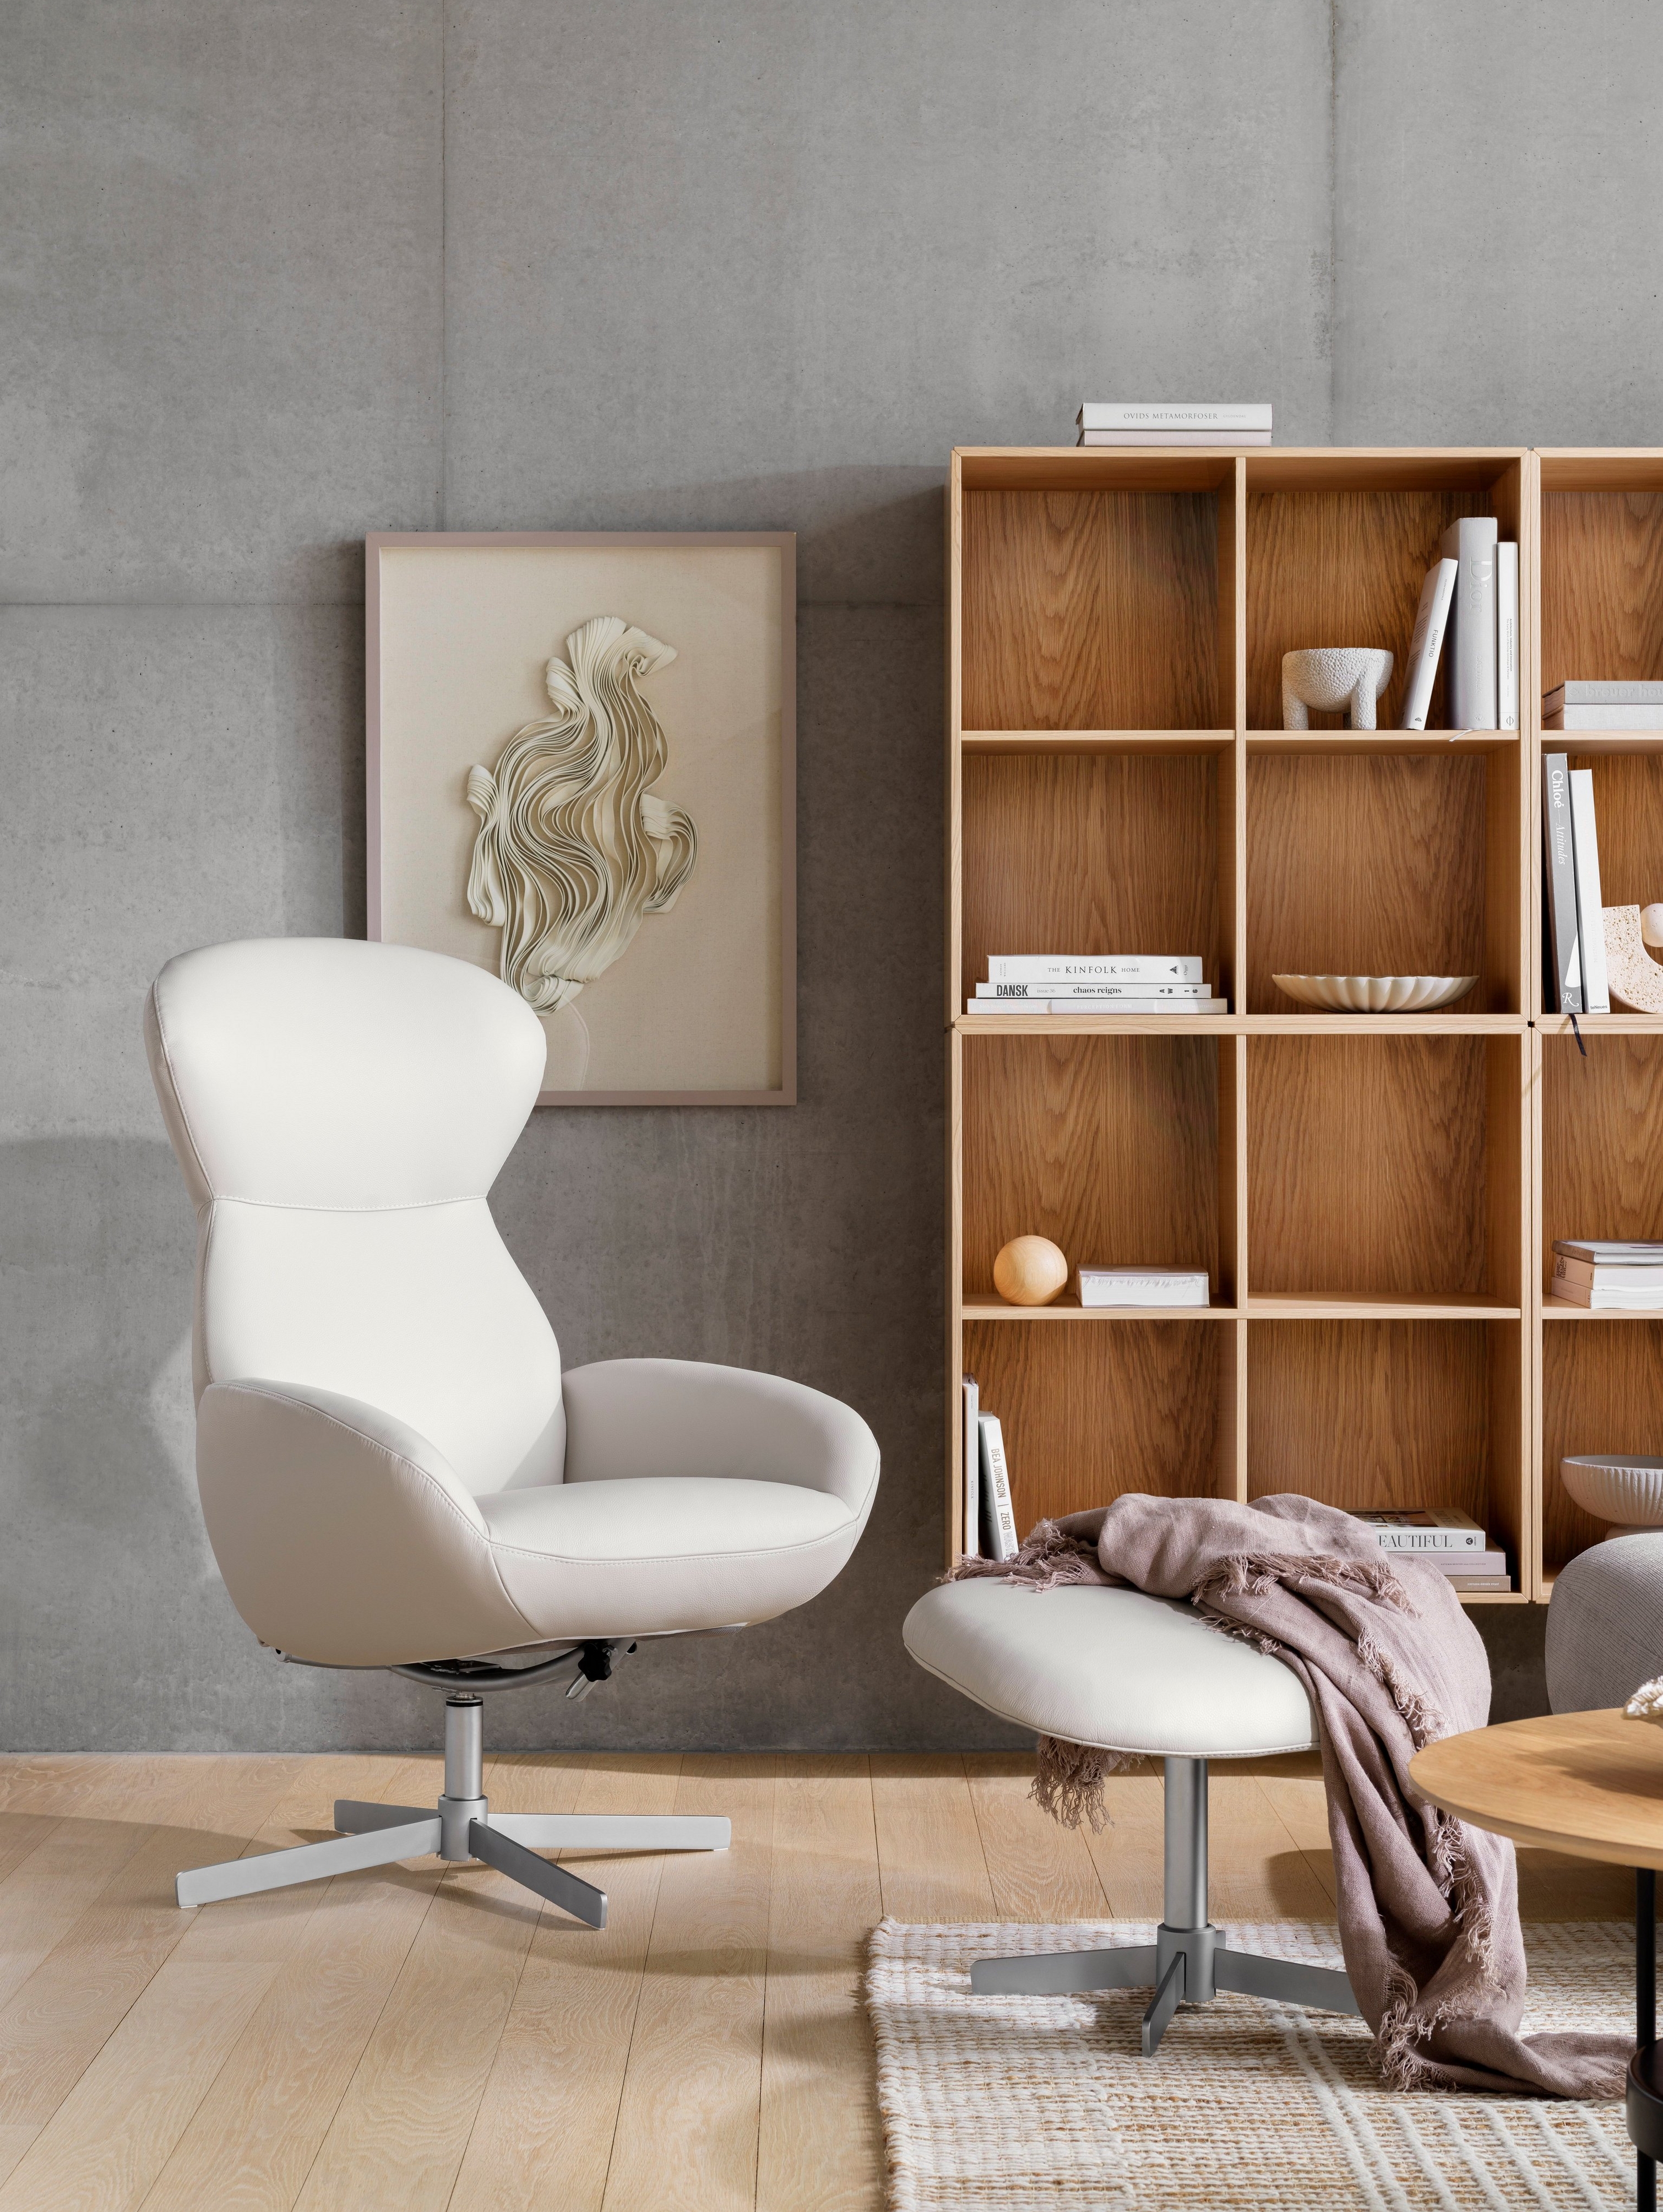 White Athena recliner chair with footrest and wooden Como bookshelf in a cozy room.